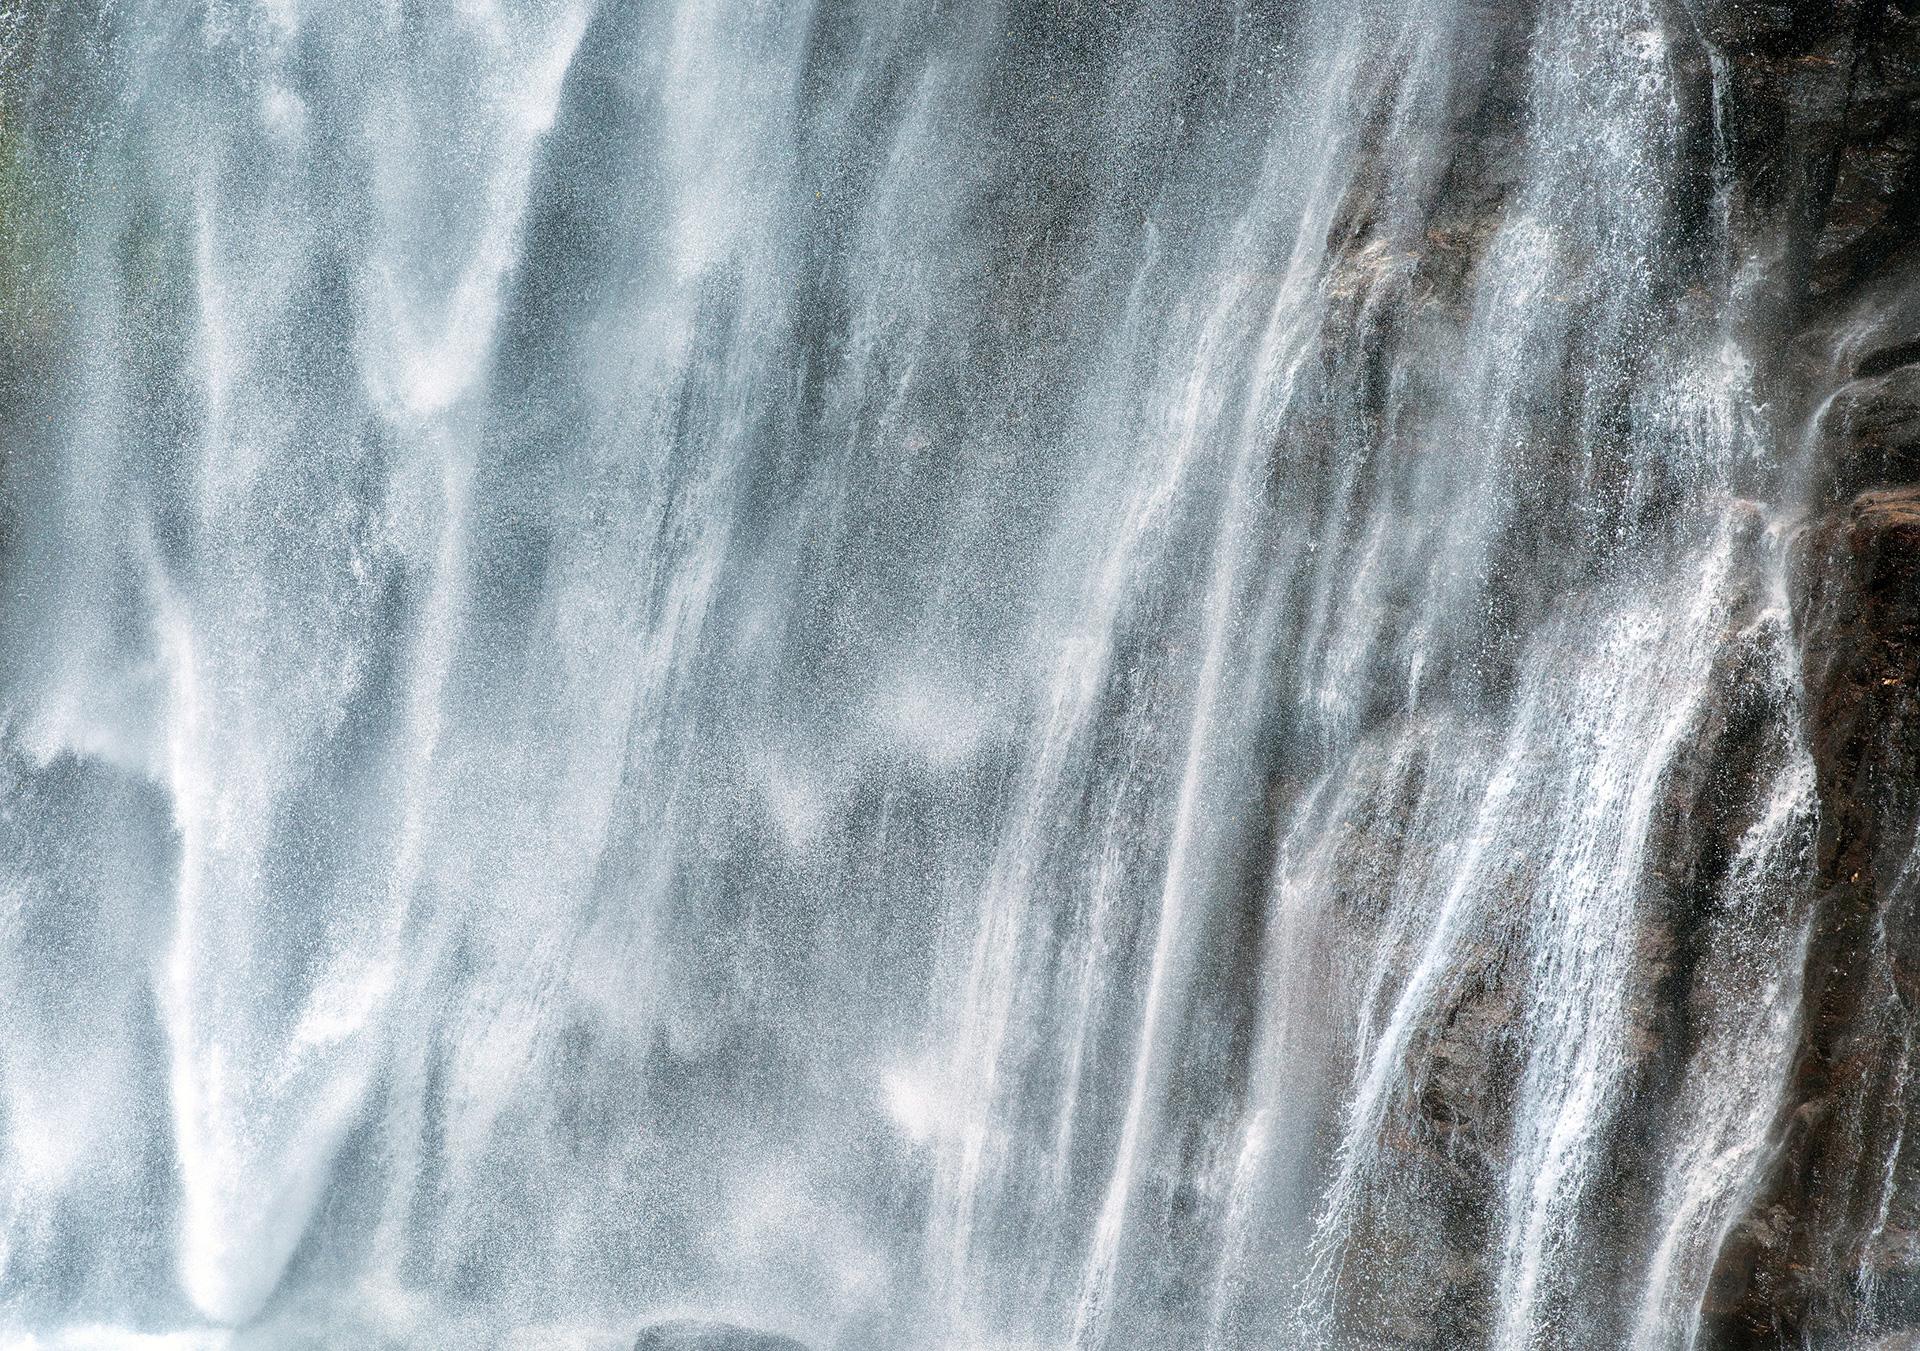 Close-up view of a waterfall, Italy